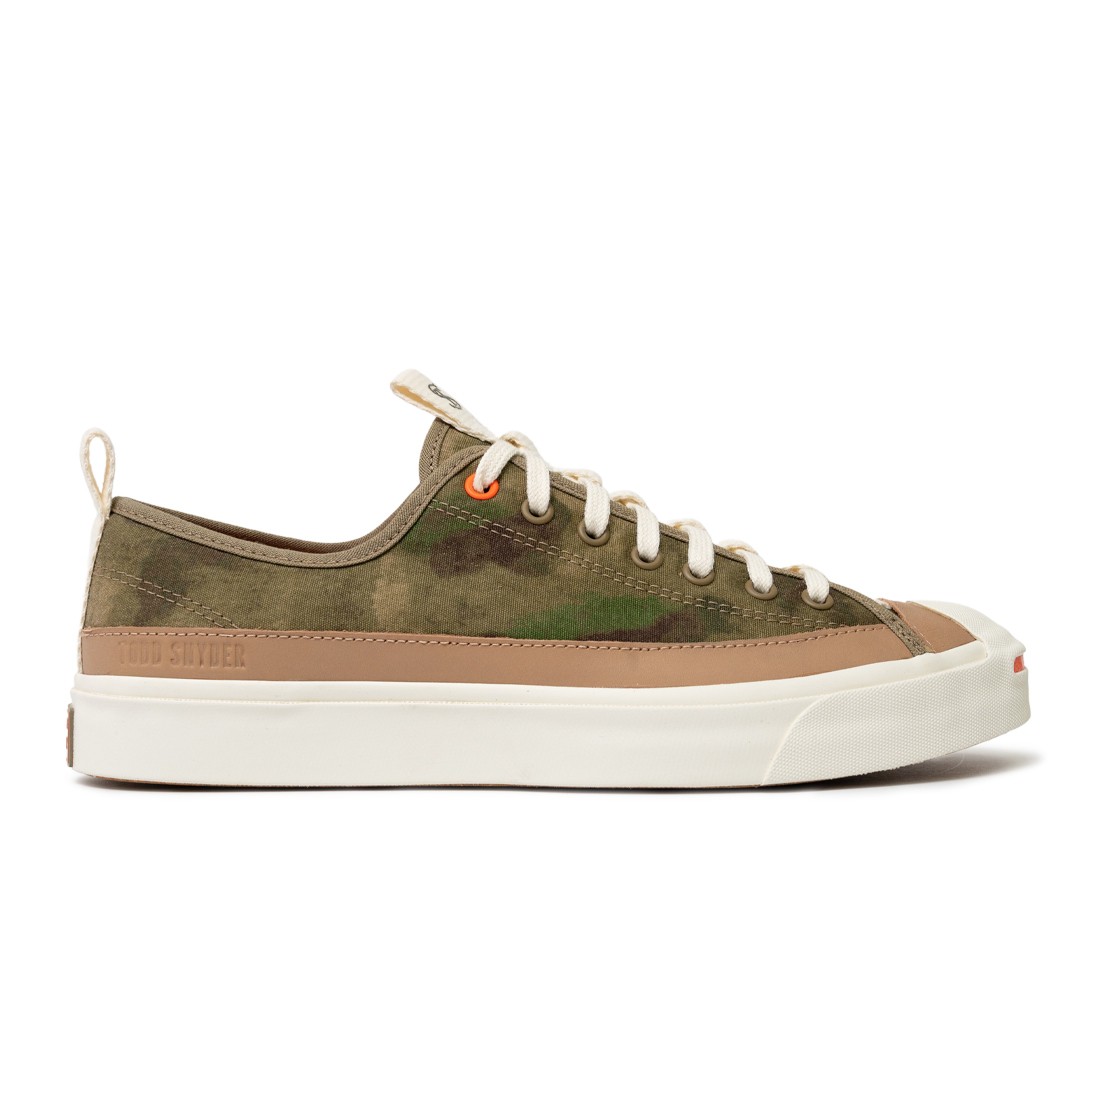 Converse x Todd Snyder Men Jack Purcell Ox (green / elmwood / egret / champagne tan)